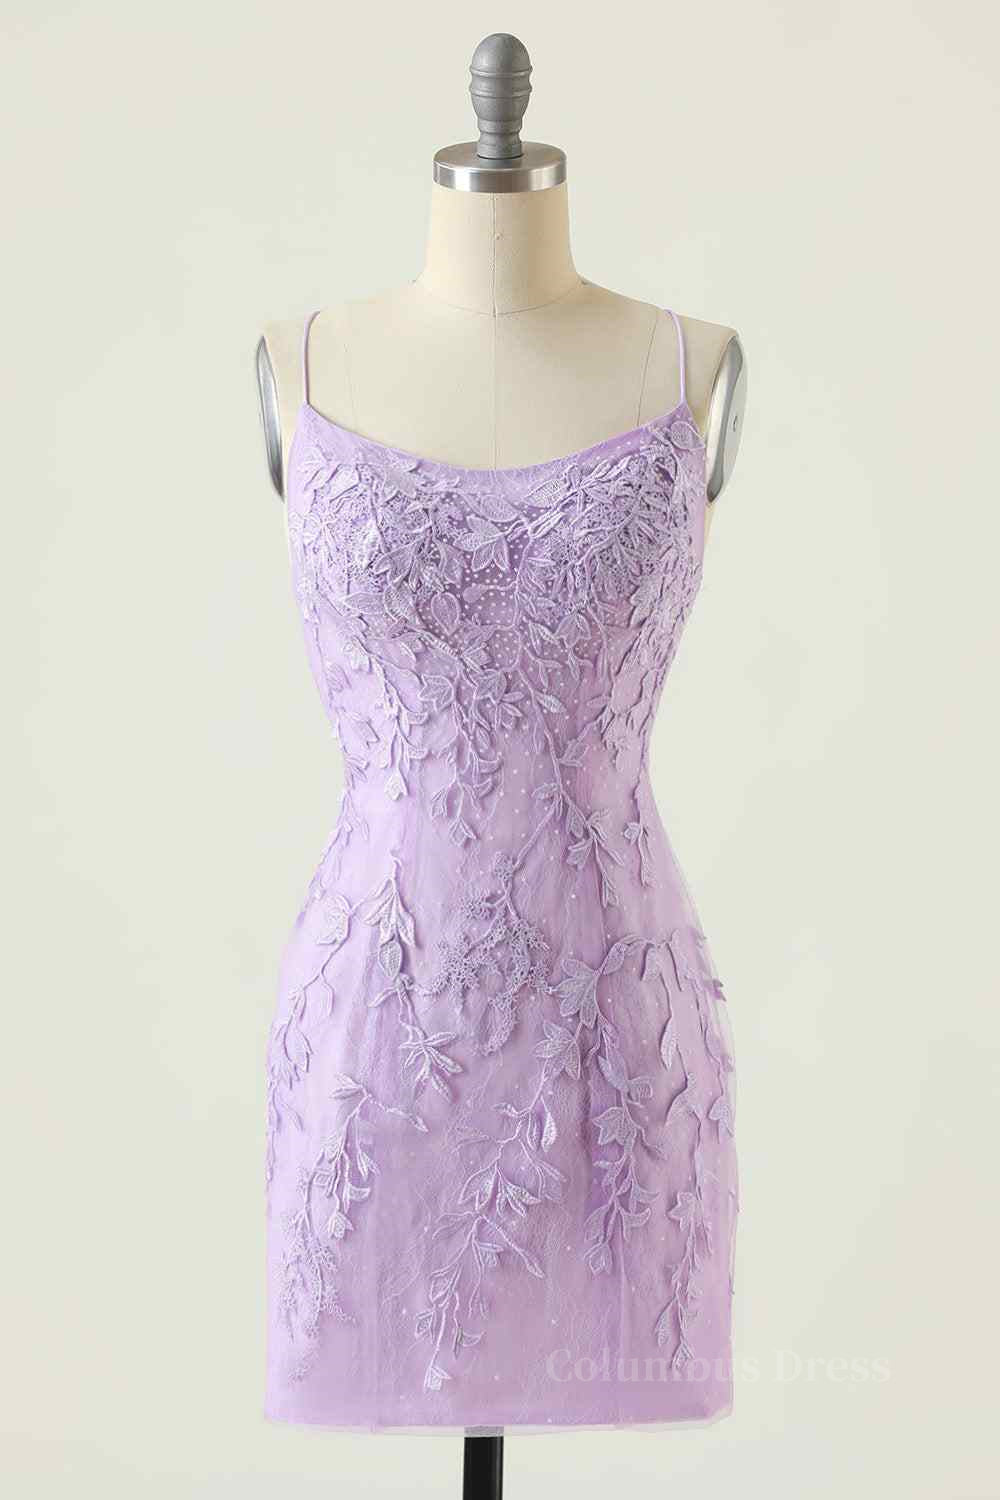 Lilac Sheath Scoop Neck Lace-up Back Applique Mini Corset Homecoming Dress outfit, Formal Dress Lace